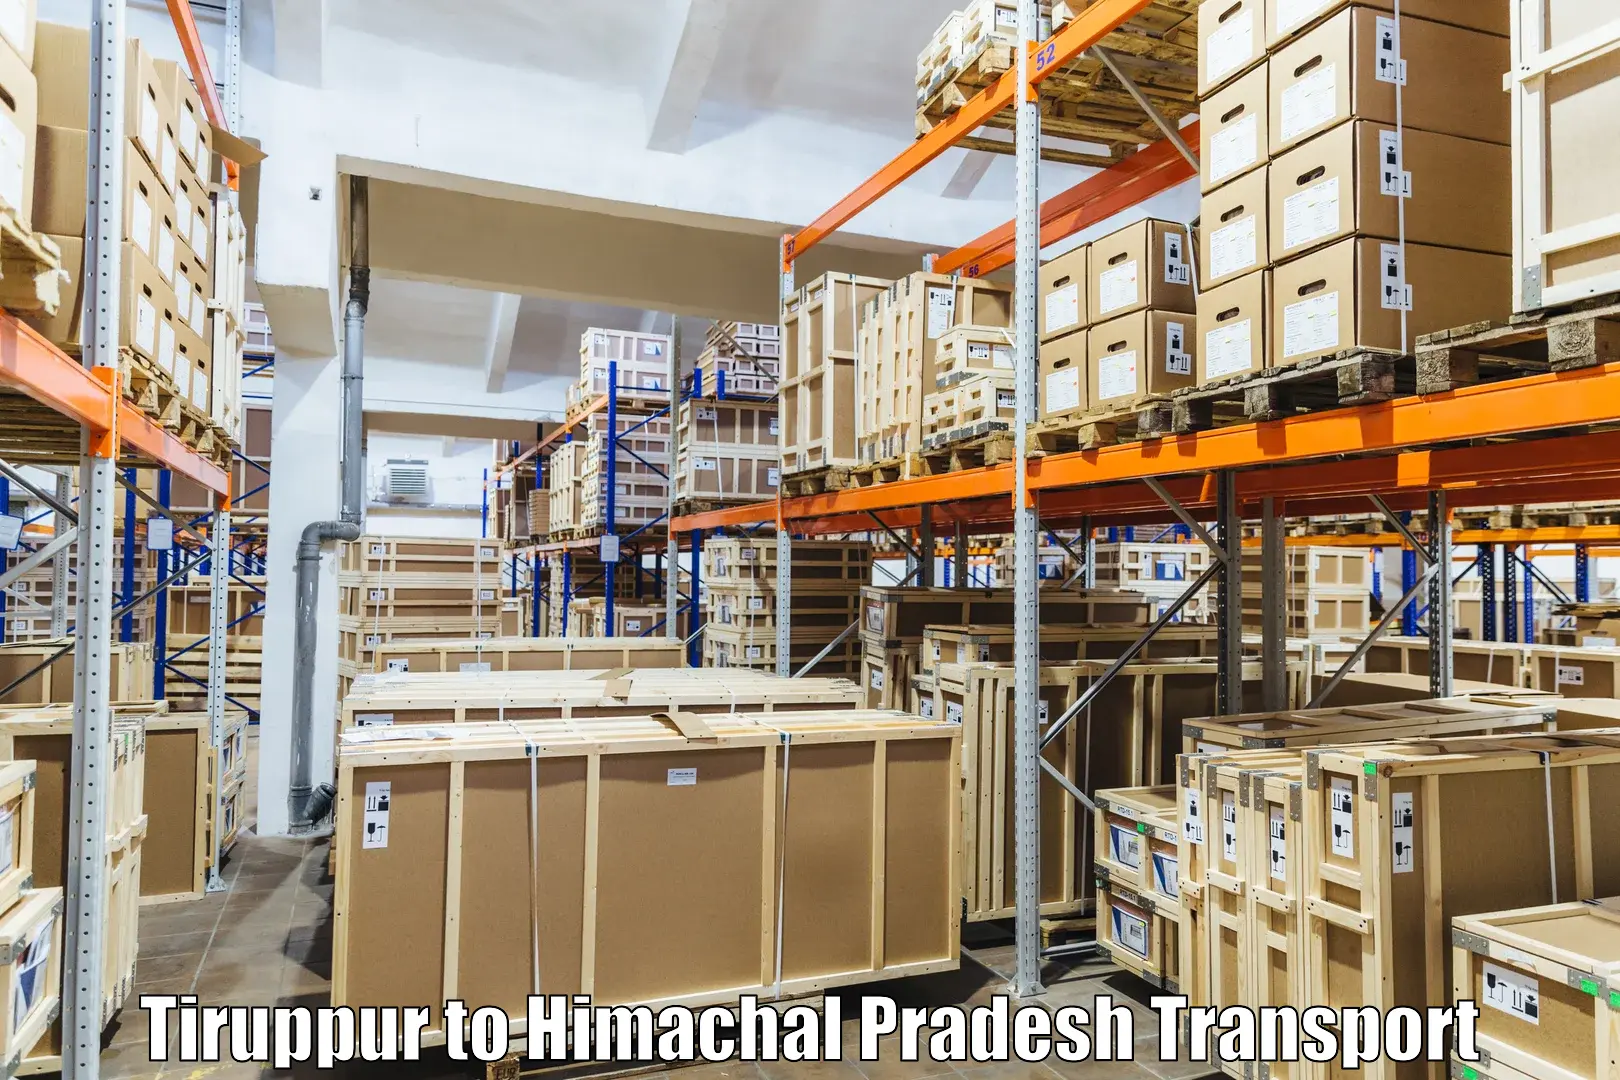 Goods transport services in Tiruppur to Dharamshala